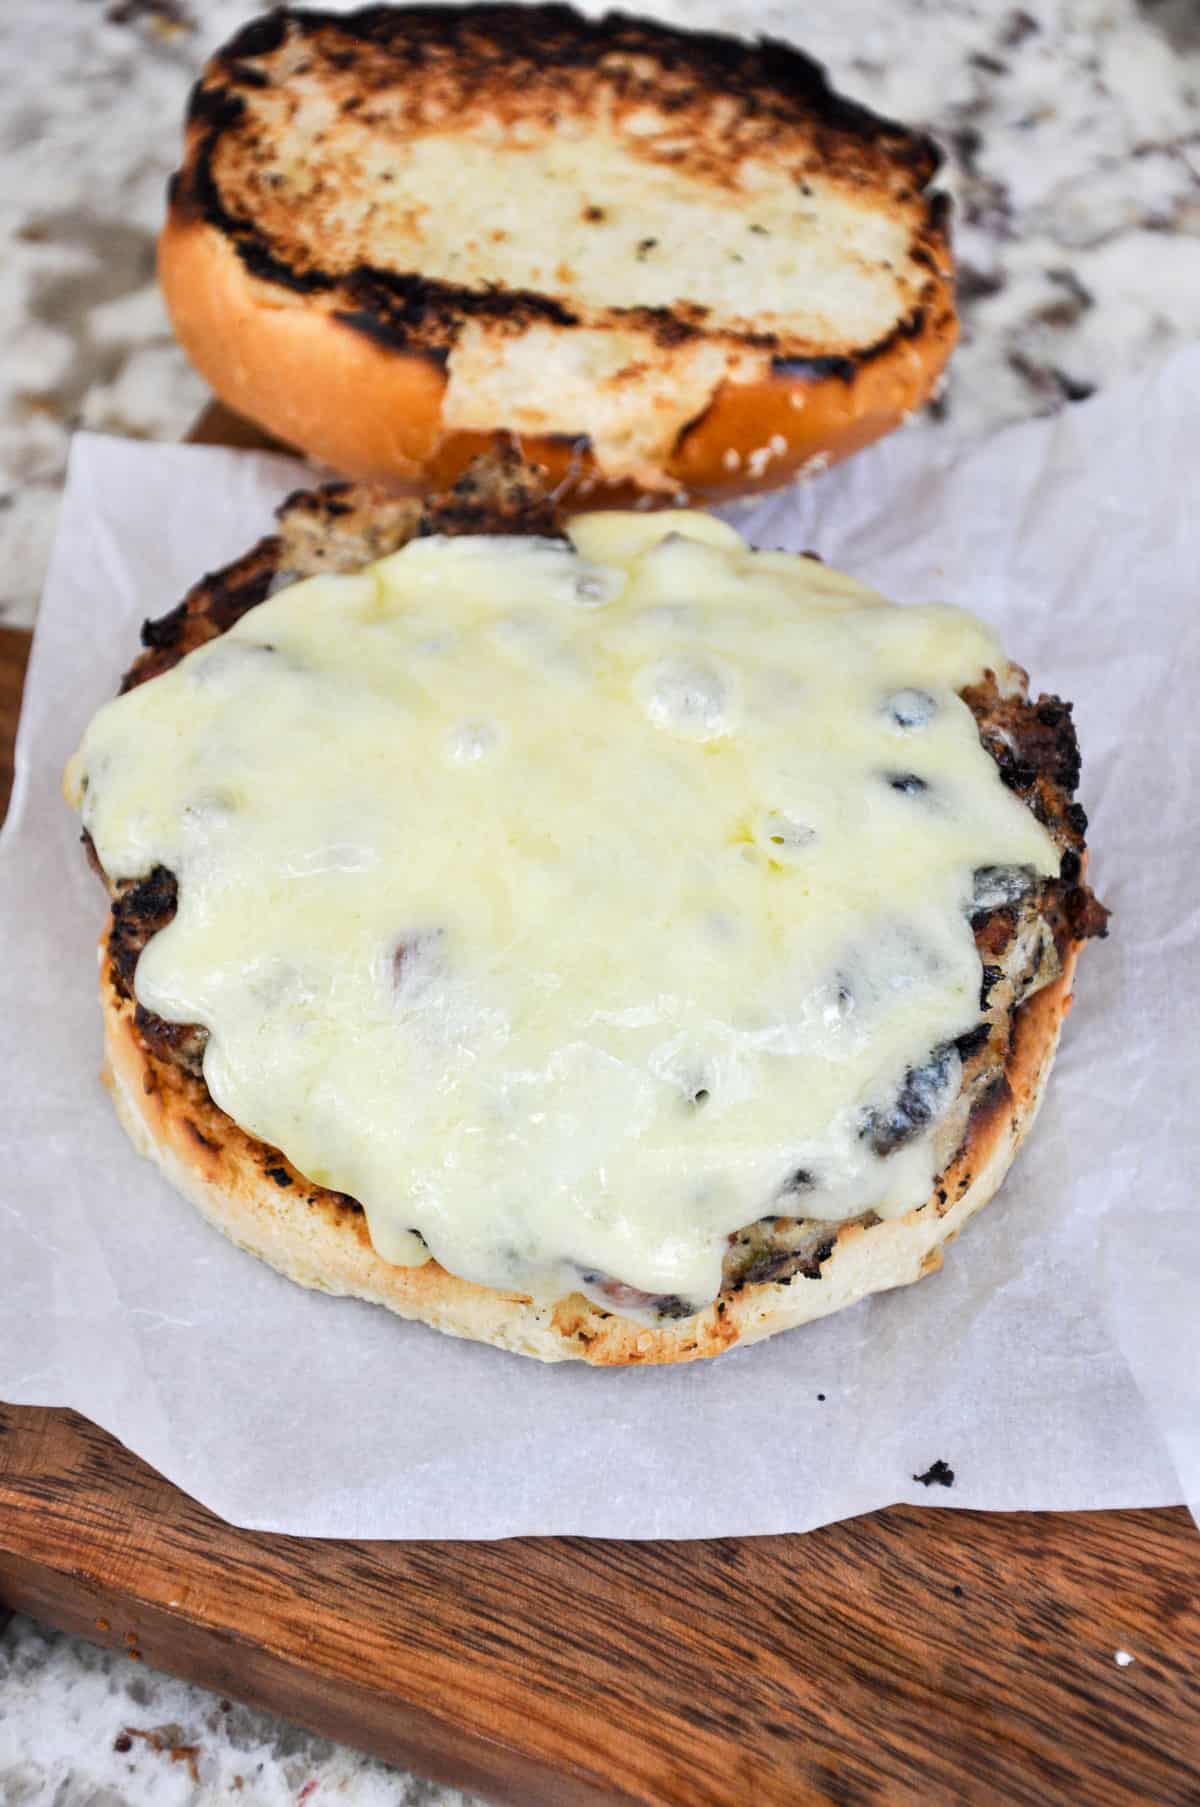 Melted pepper jack cheese over turkey patty